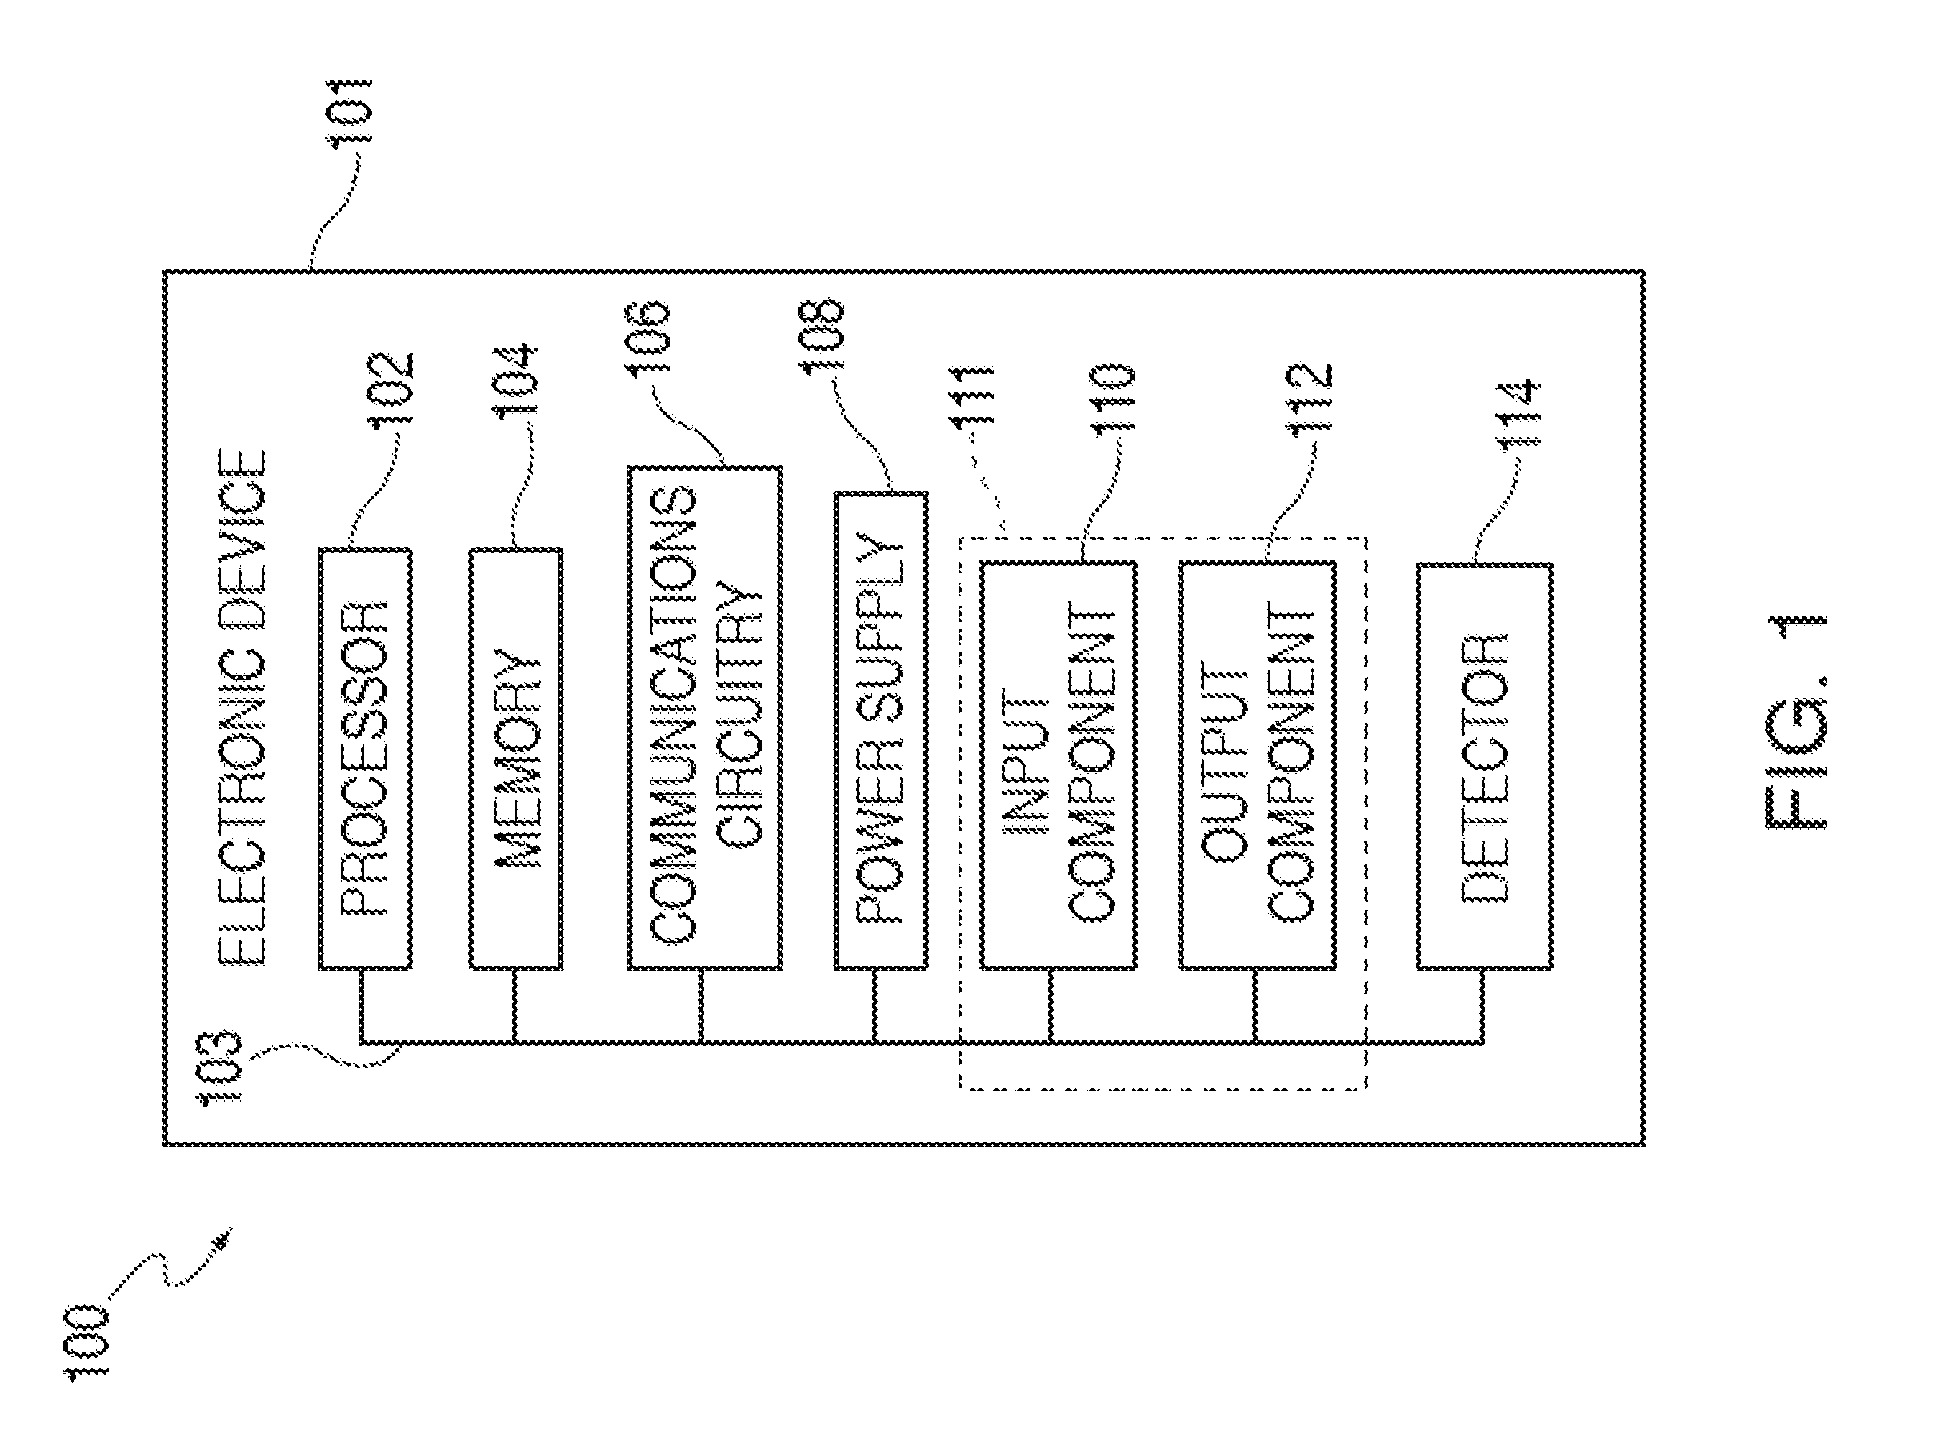 Systems and Methods for Providing Inputs to an Electronic Device with a Button Assmebly